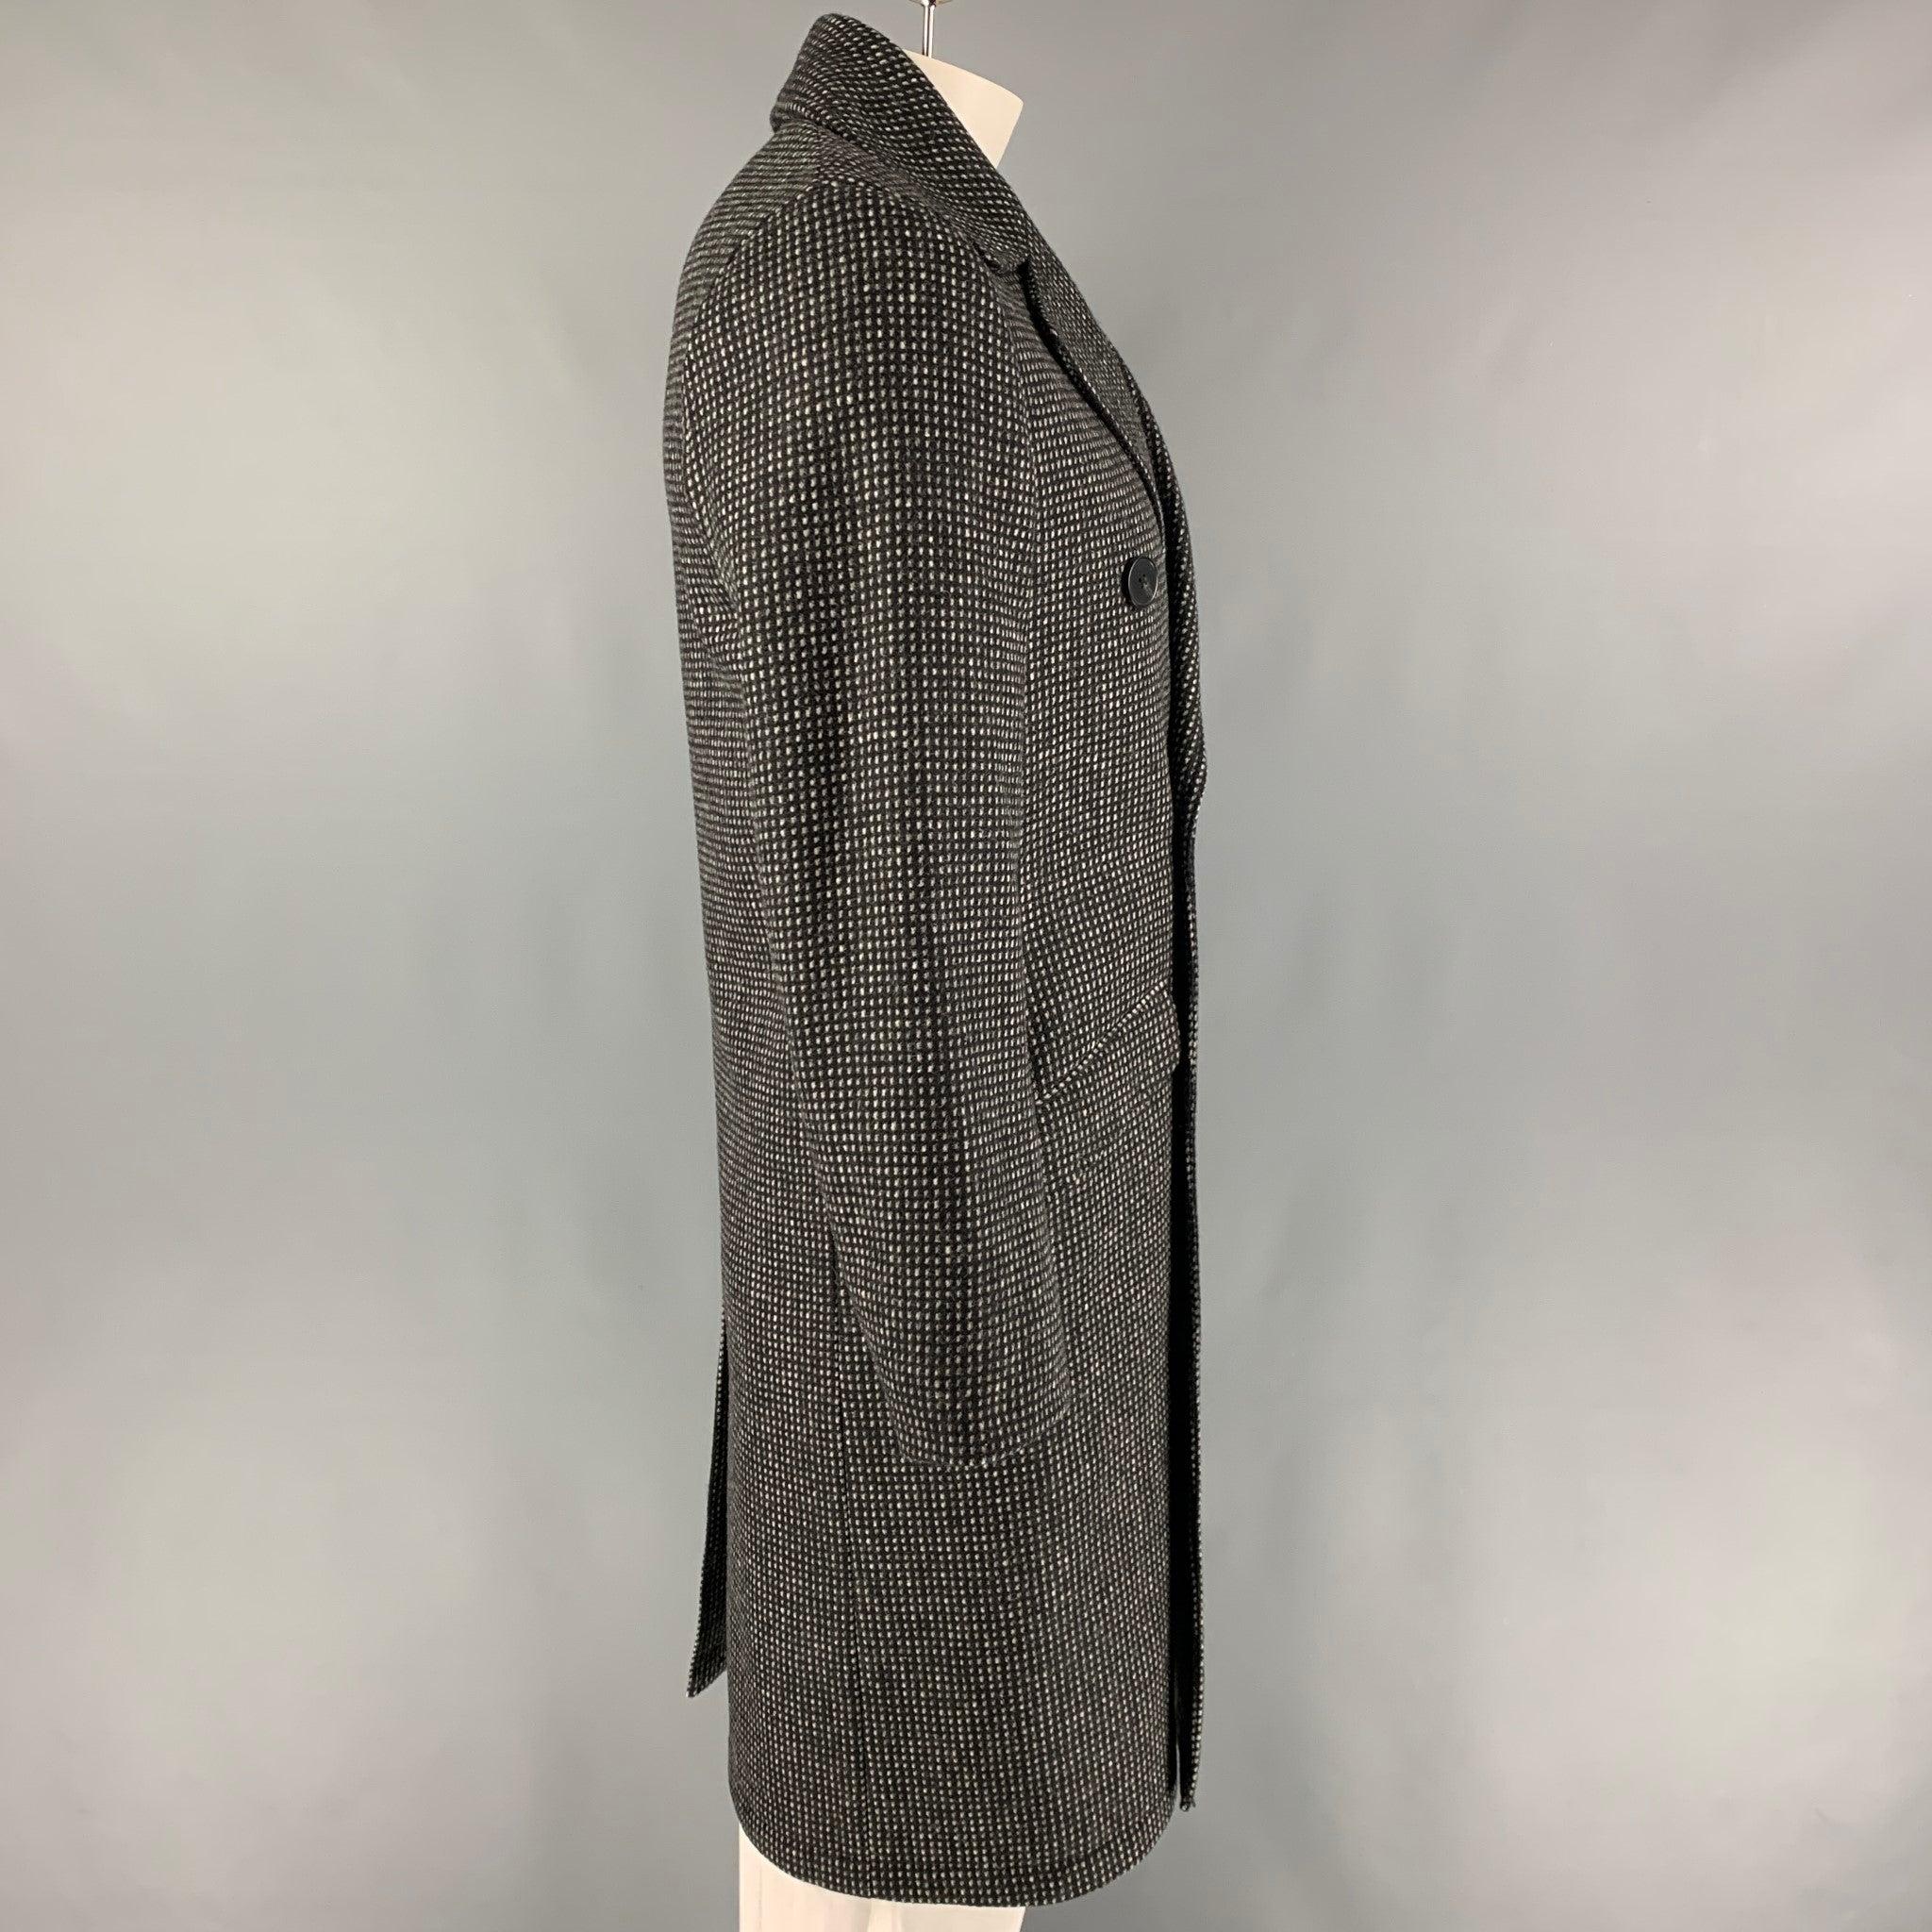 THE KOOPLES coat comes in a black & grey grid wool blend featuring a notch lapel, flap pockets, single back vent, and a double breasted closure.
Very Good
Pre-Owned Condition. 

Marked:   48 R 

Measurements: 
 
Shoulder: 17.5 inches  Chest: 42